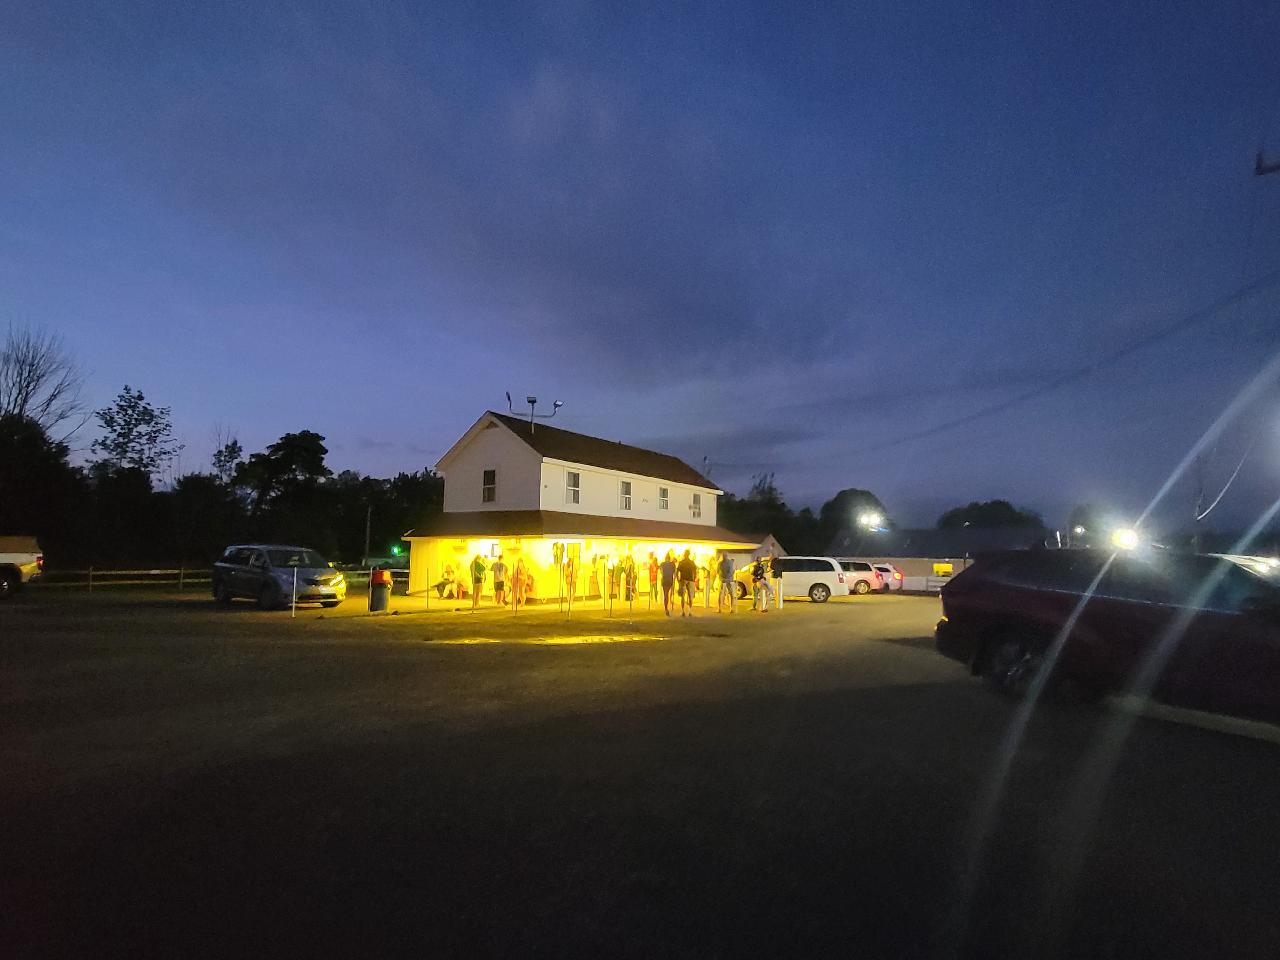 Two story building with people in parking lot at night time.